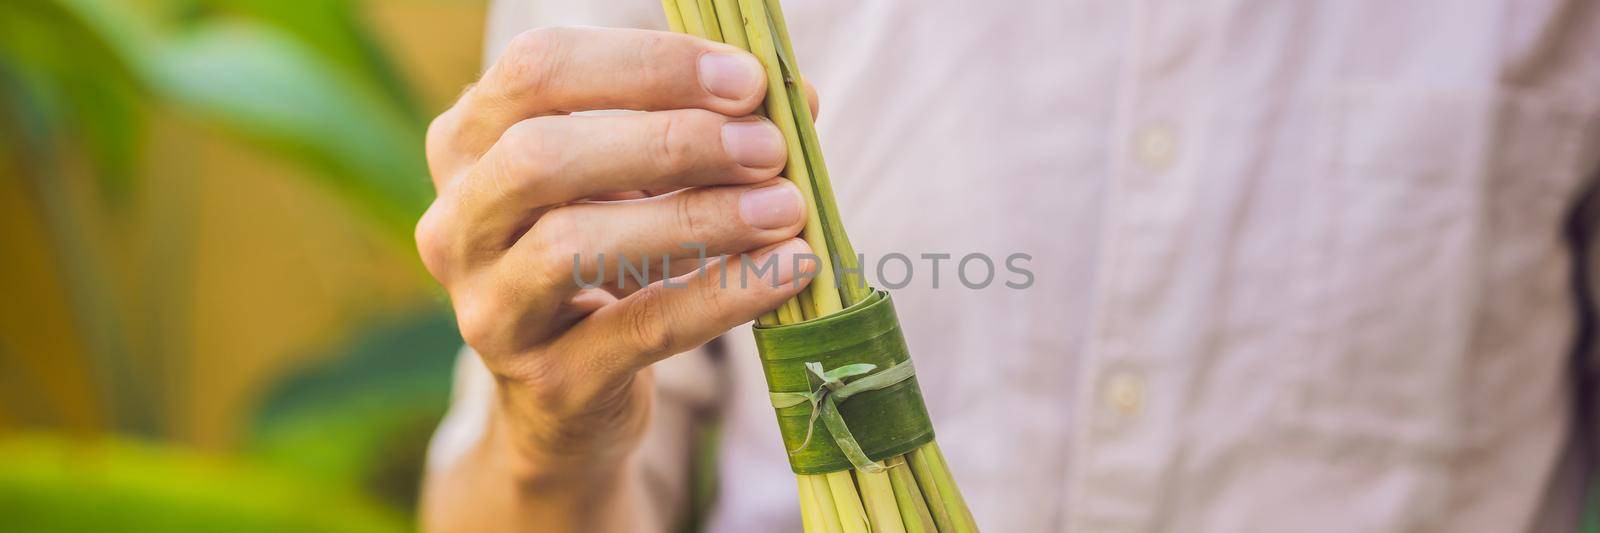 BANNER, LONG FORMAT Eco-friendly product packaging concept. Lemongrass wrapped in a banana leaf, as an alternative to a plastic bag. Zero waste concept. Alternative packaging by galitskaya